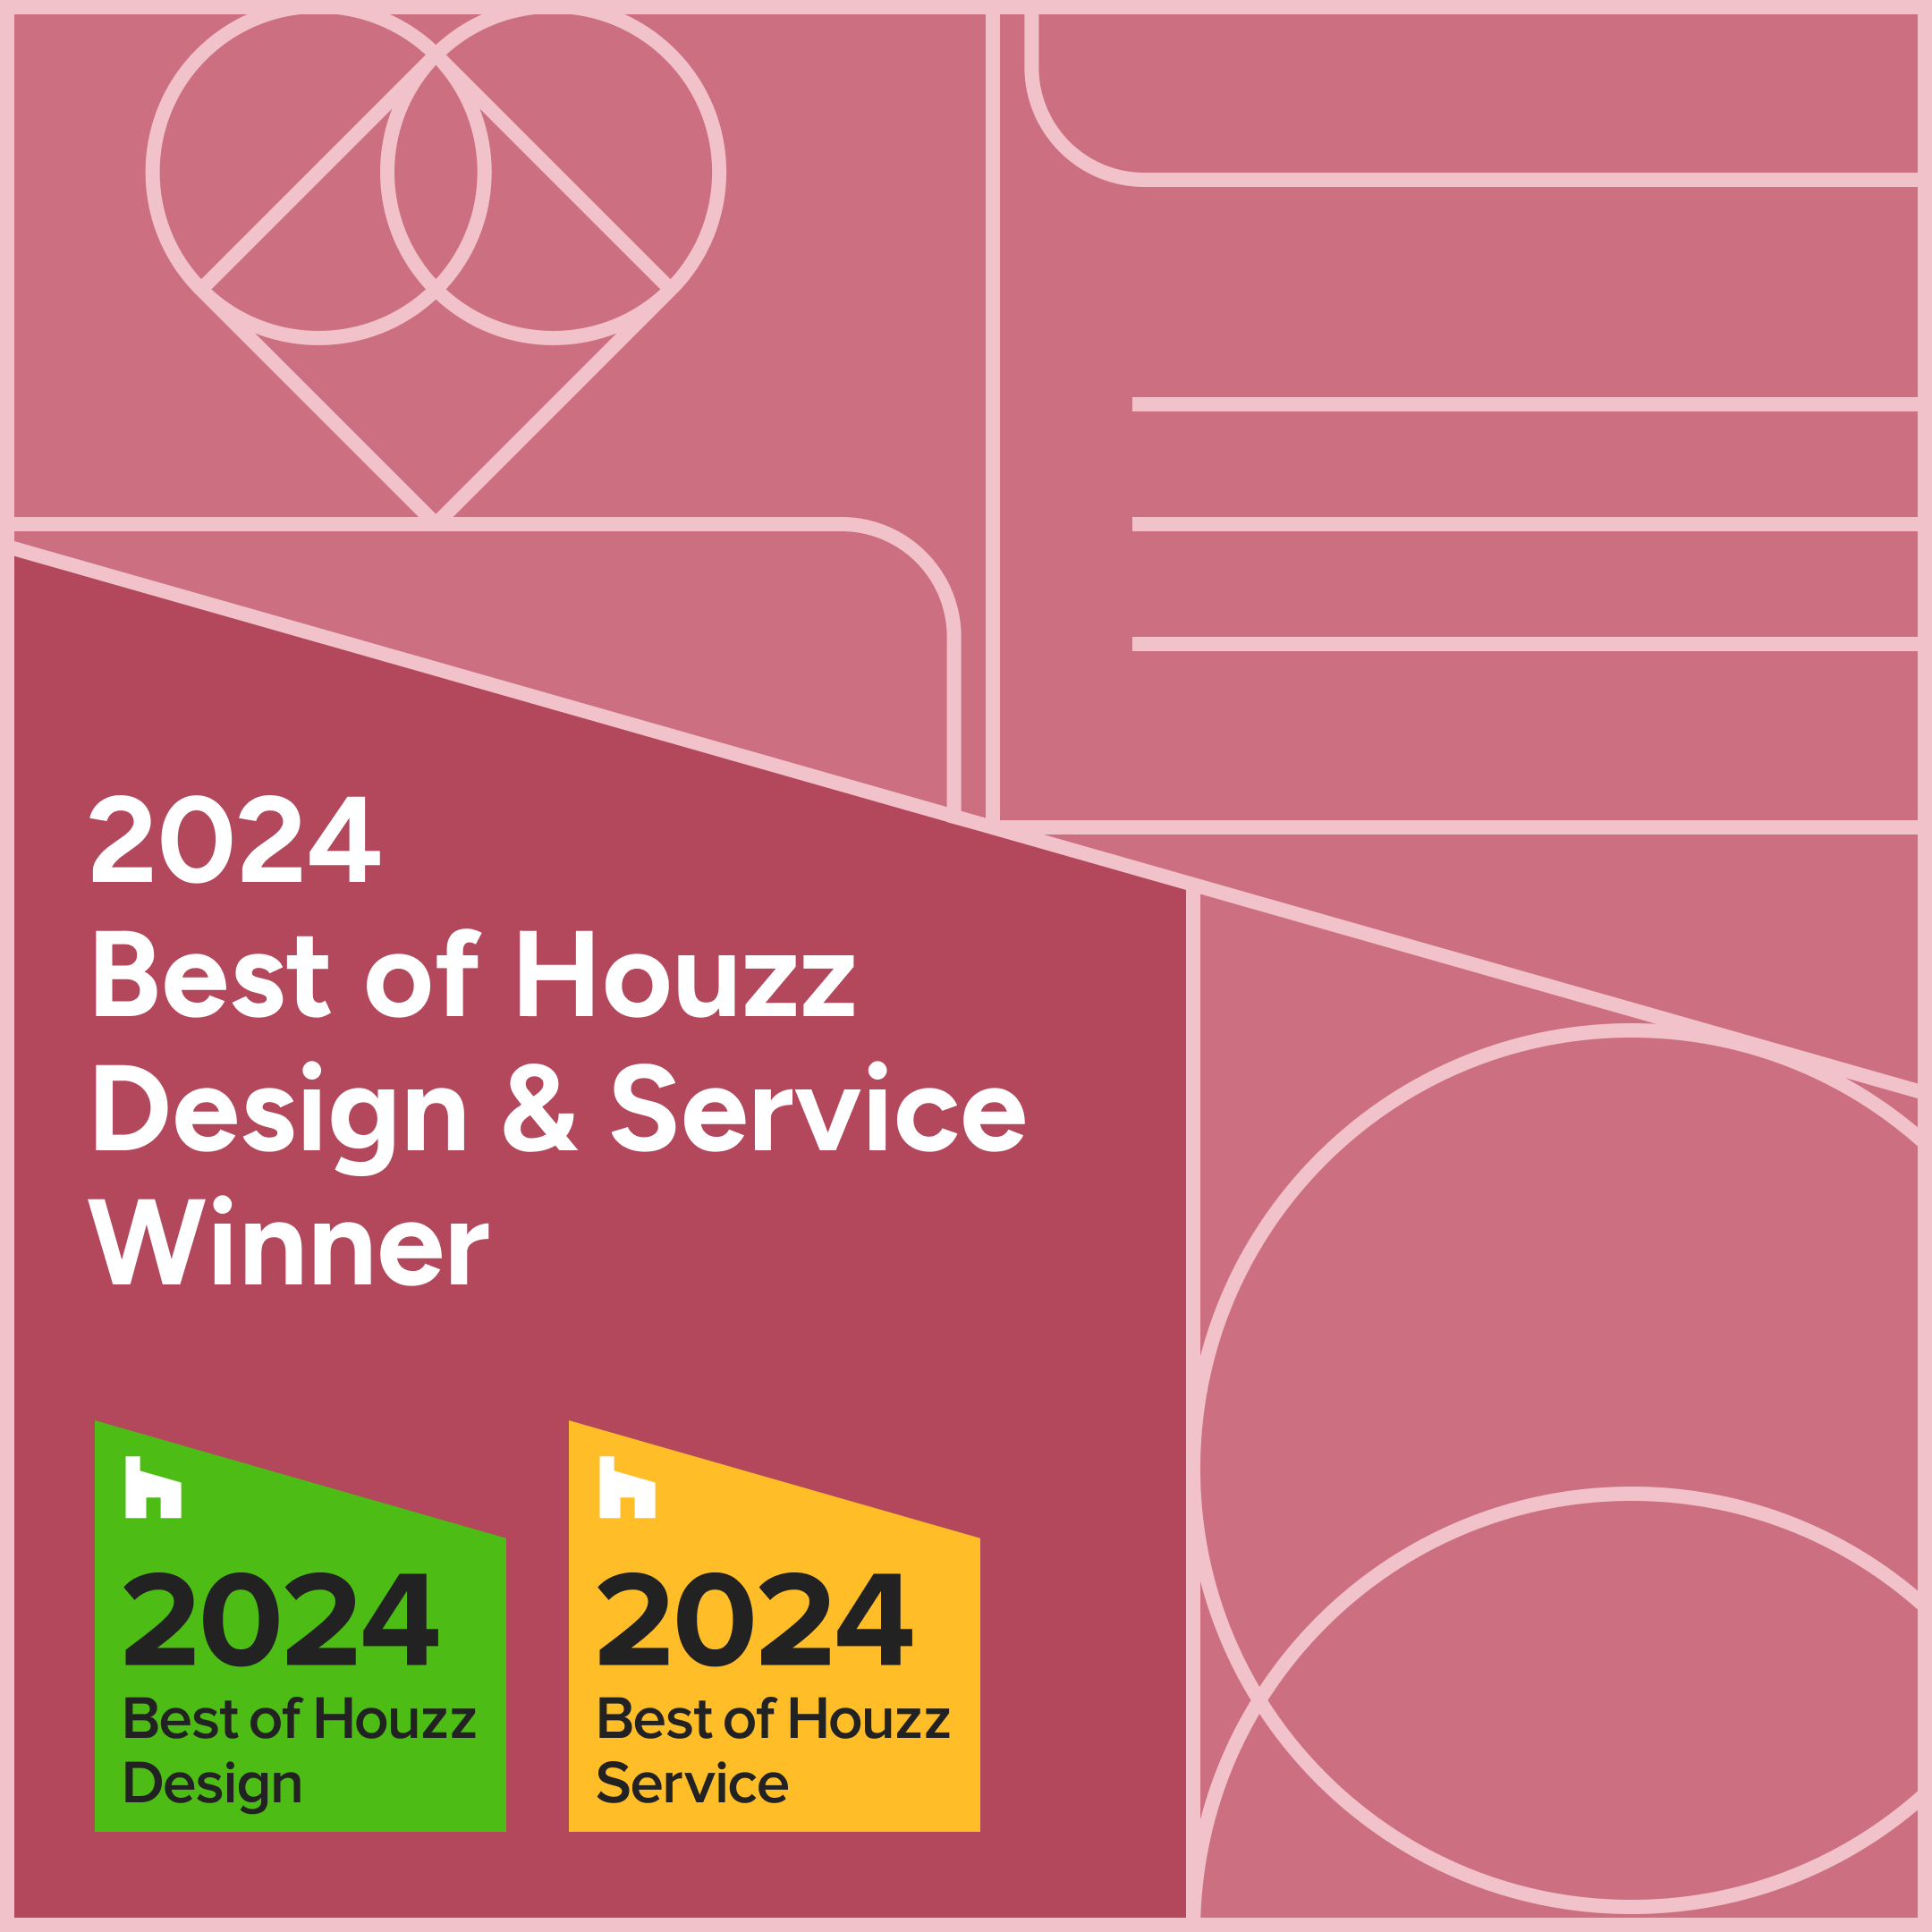 123 Remodeling Wins Best Of Houzz 2024 Awards For Service And Design